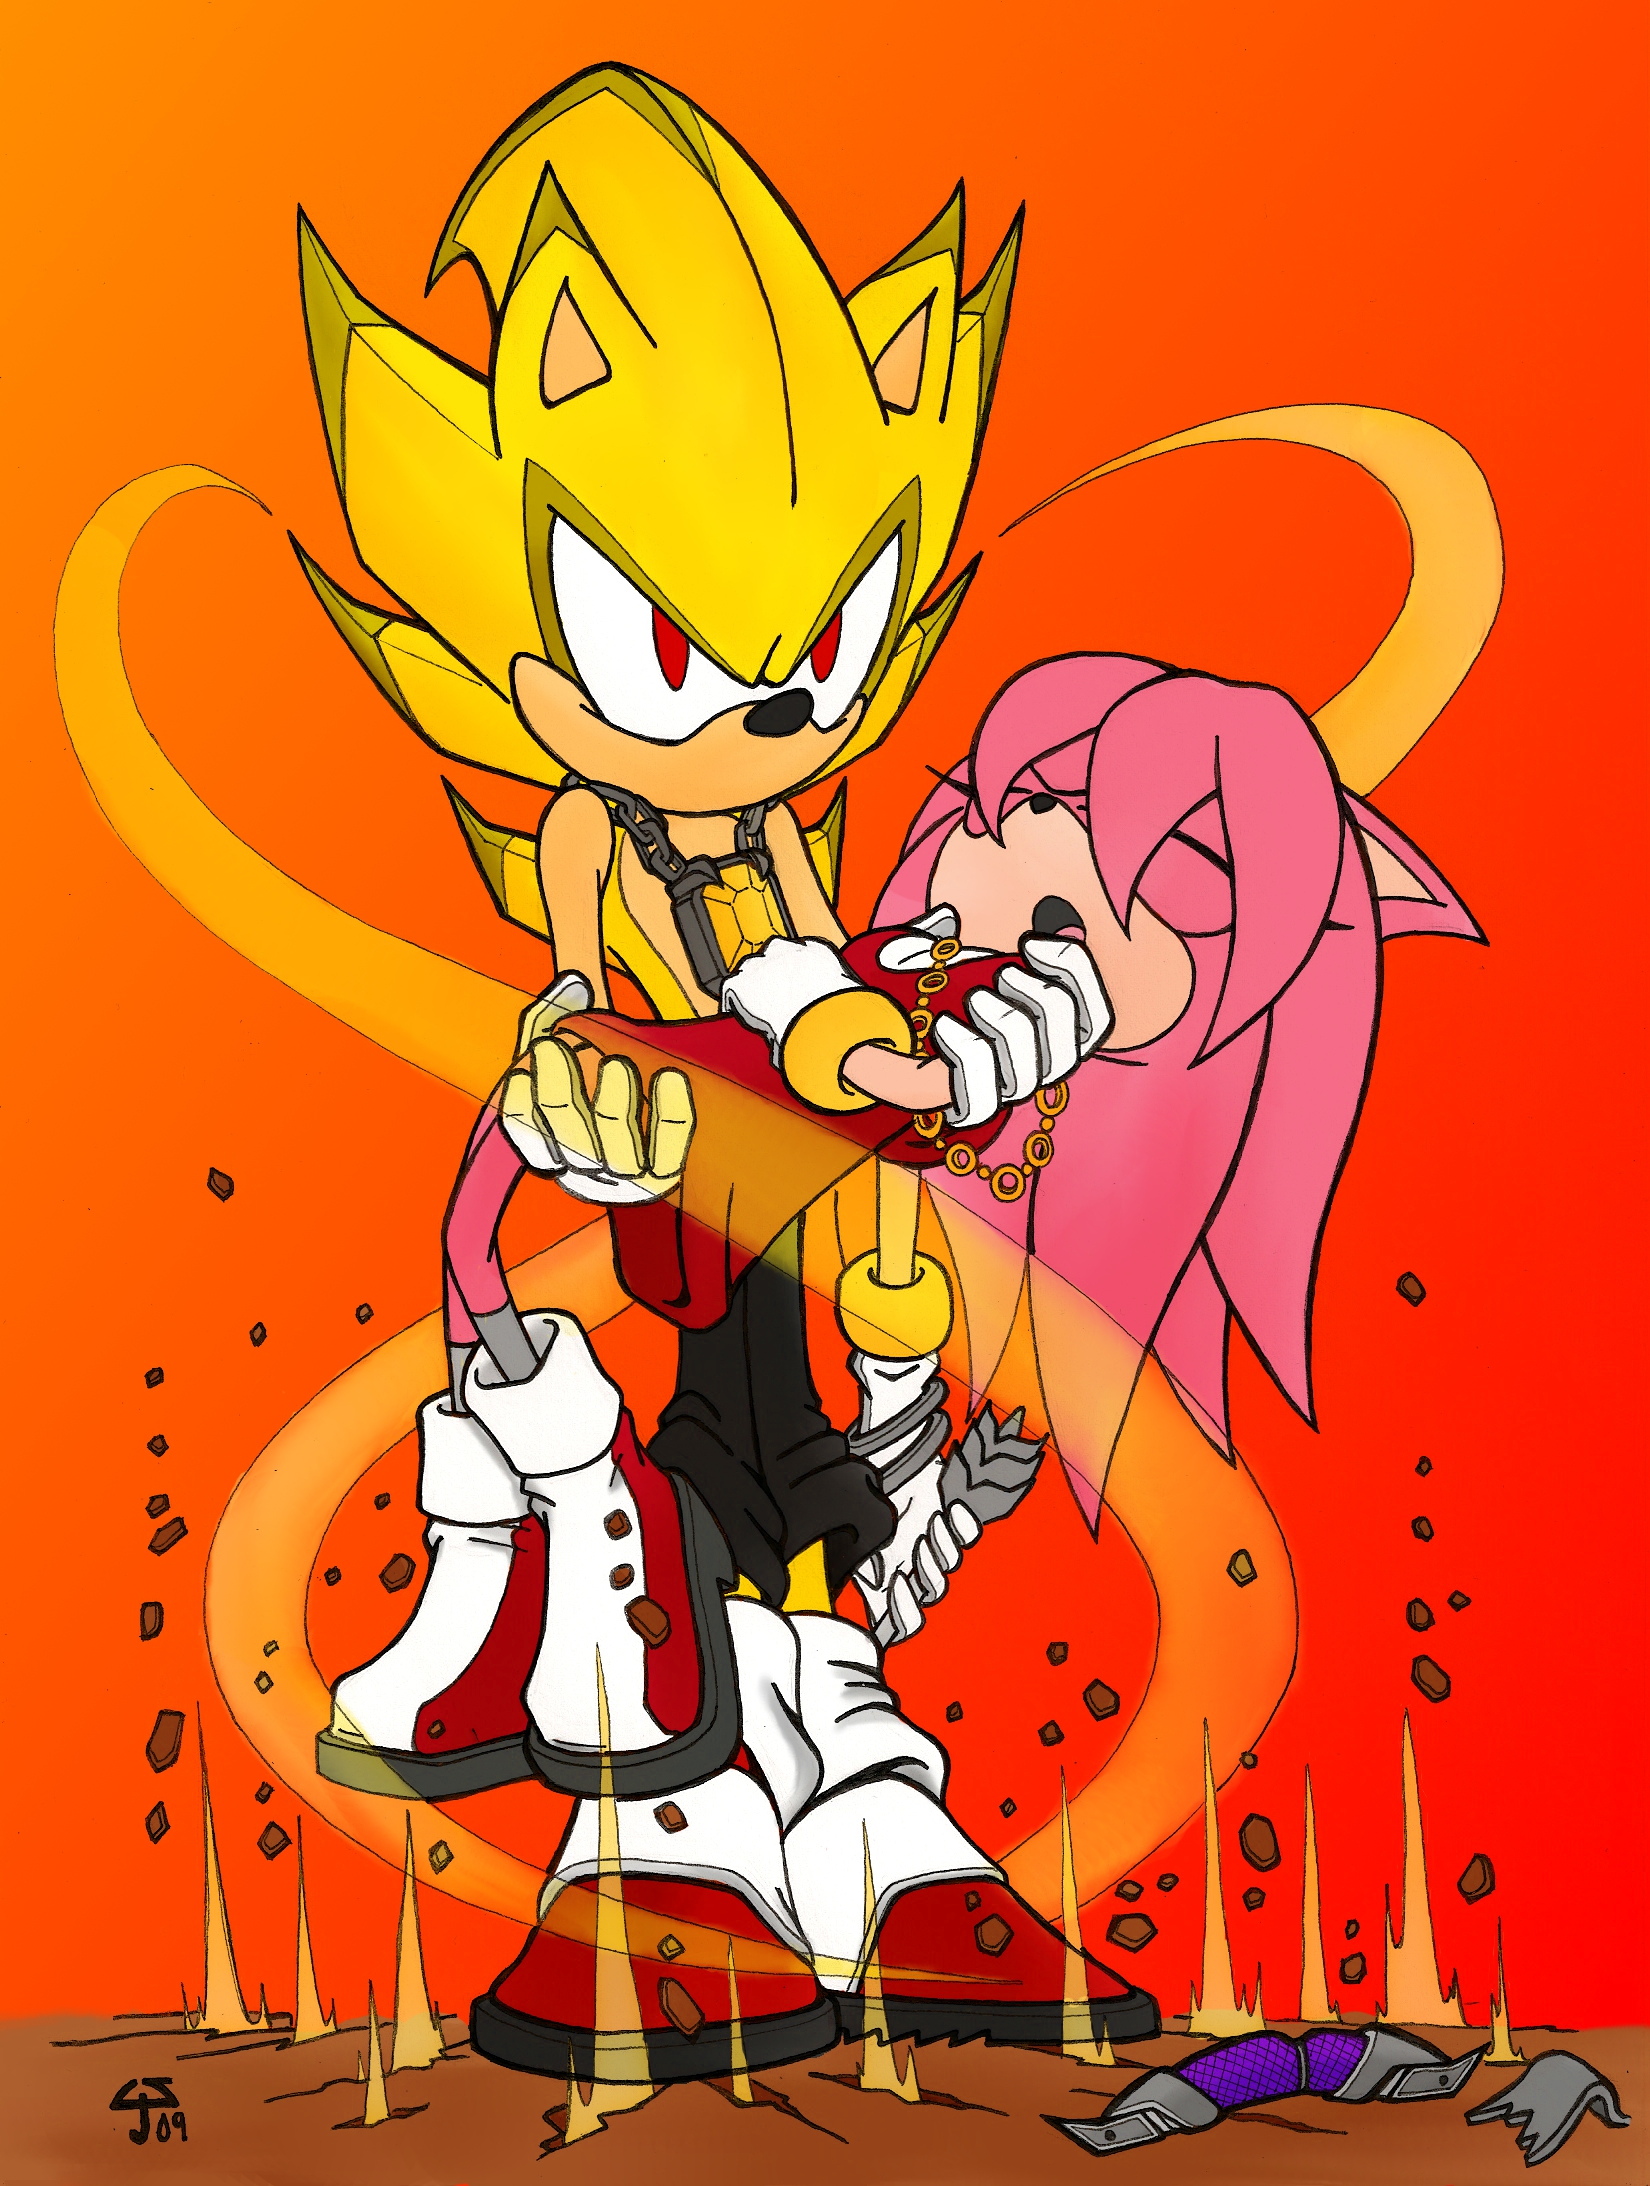 Gallery of Sonic Saves Amy.